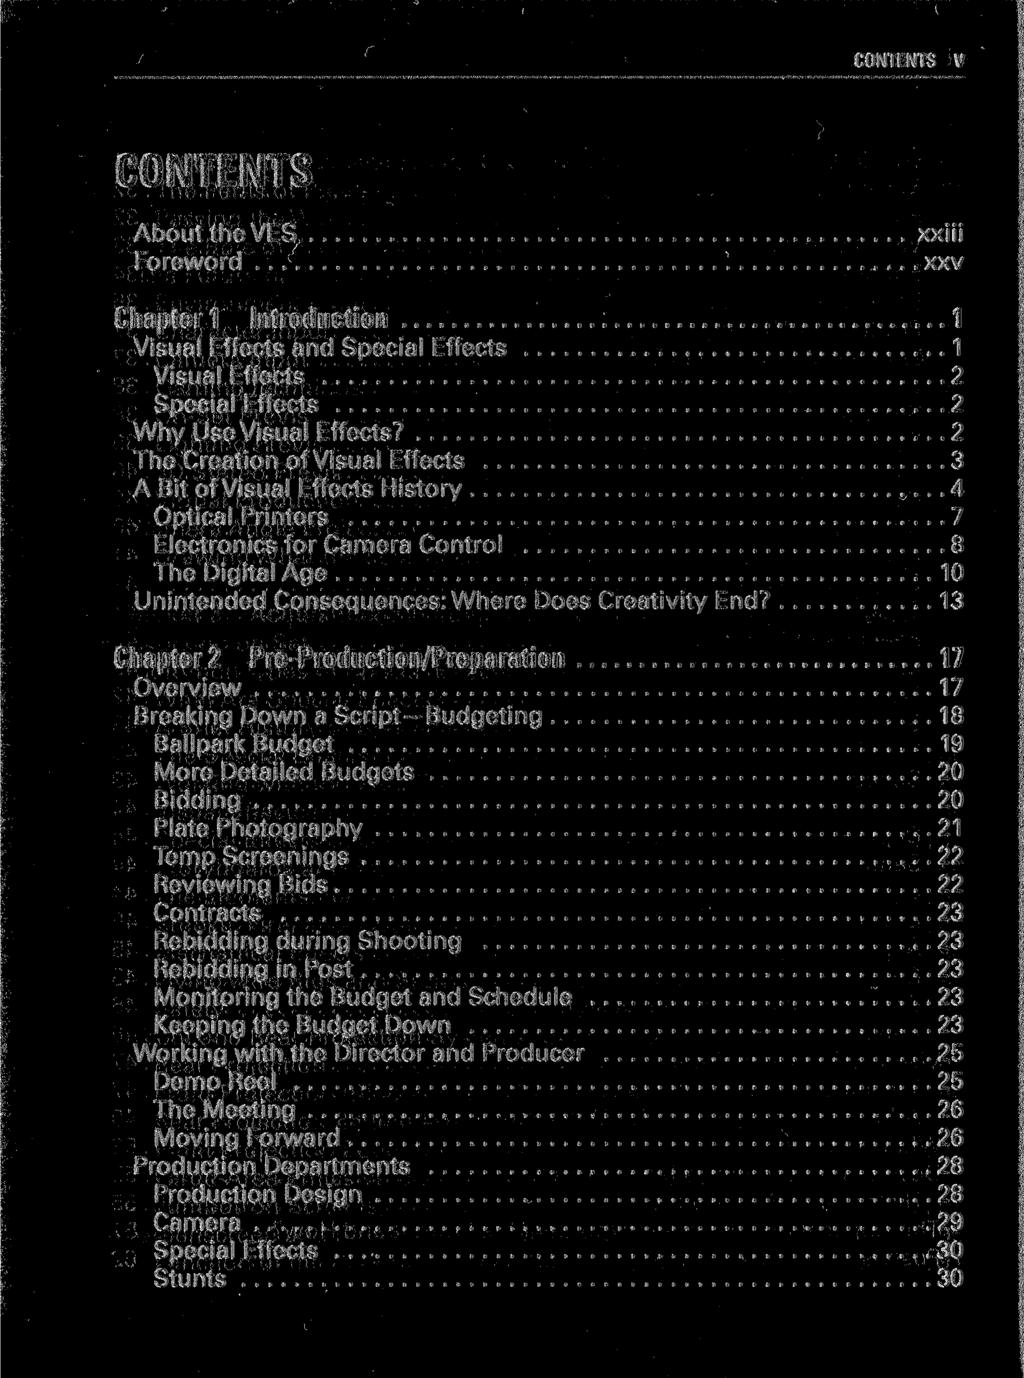 CONTENTS V CONTENTS About the VES Foreword xxiii xxv Chapter 1 Introduction 1 Visual Effects and Special Effects 1 Visual Effects 2 Special Effects 2 Why Use Visual Effects?